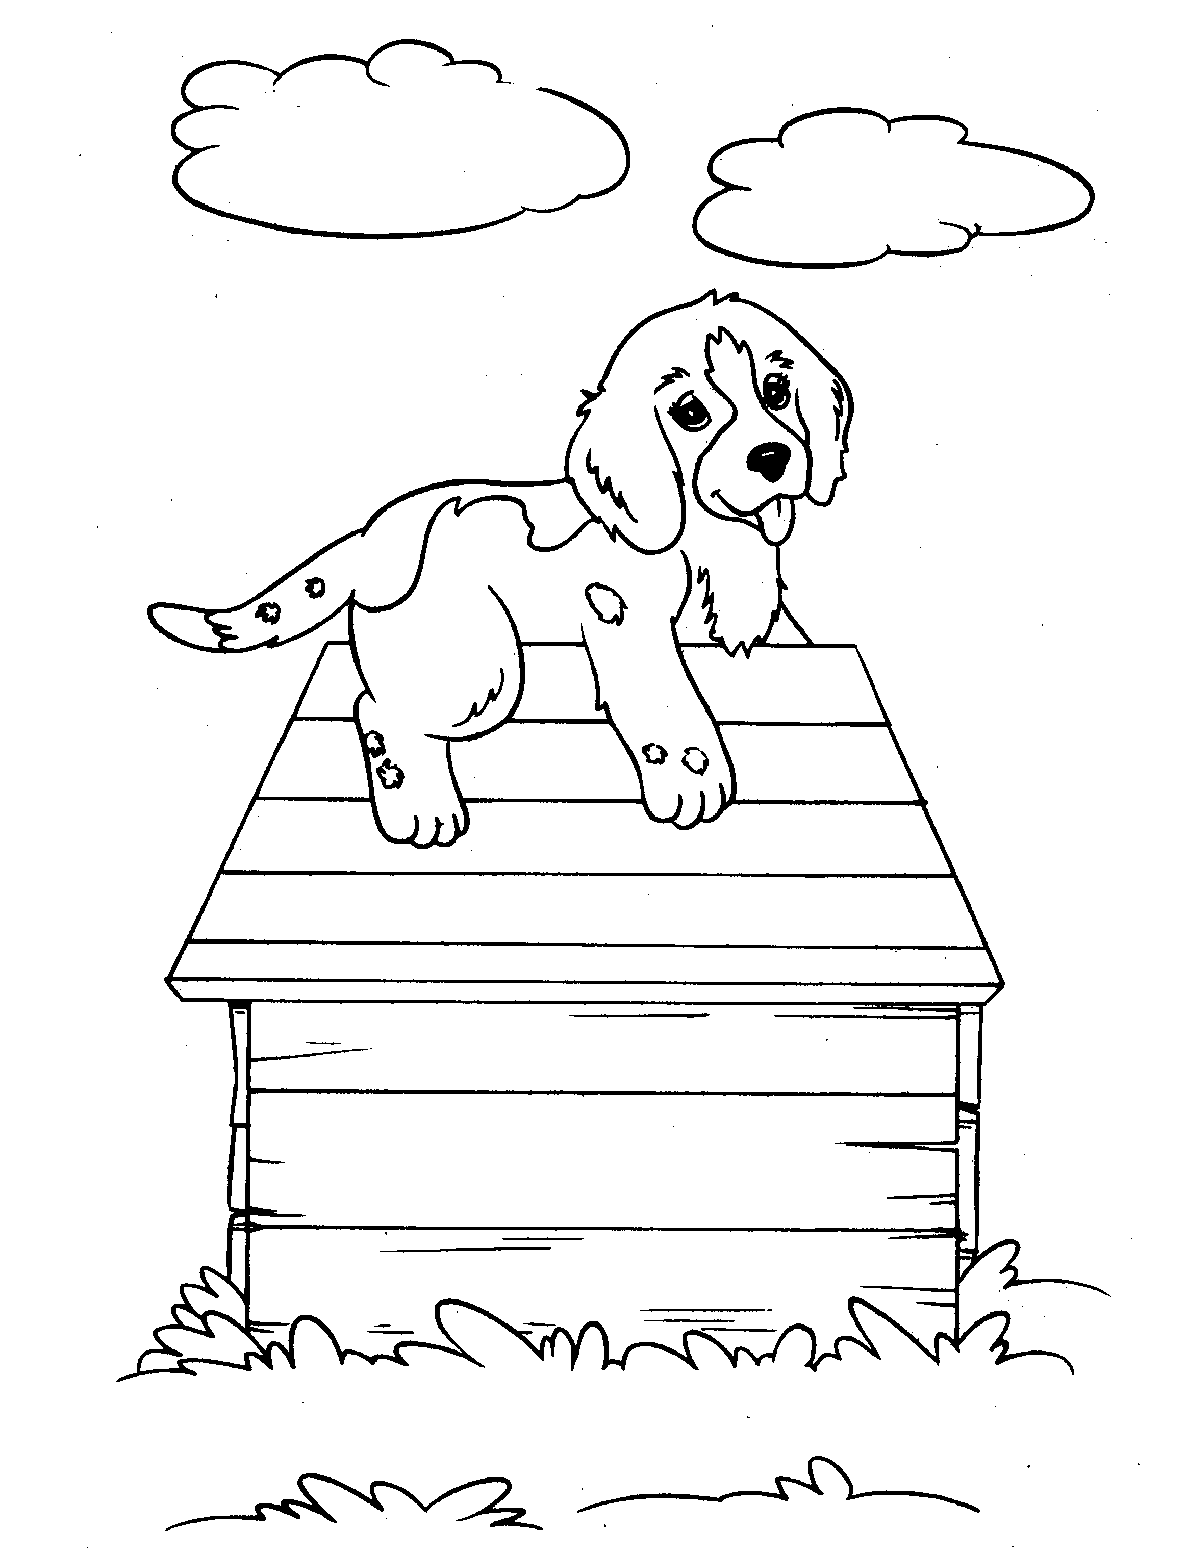 Hey everyone! Today I have some dog activity sheets for you all!Fill it out and then you can submit 